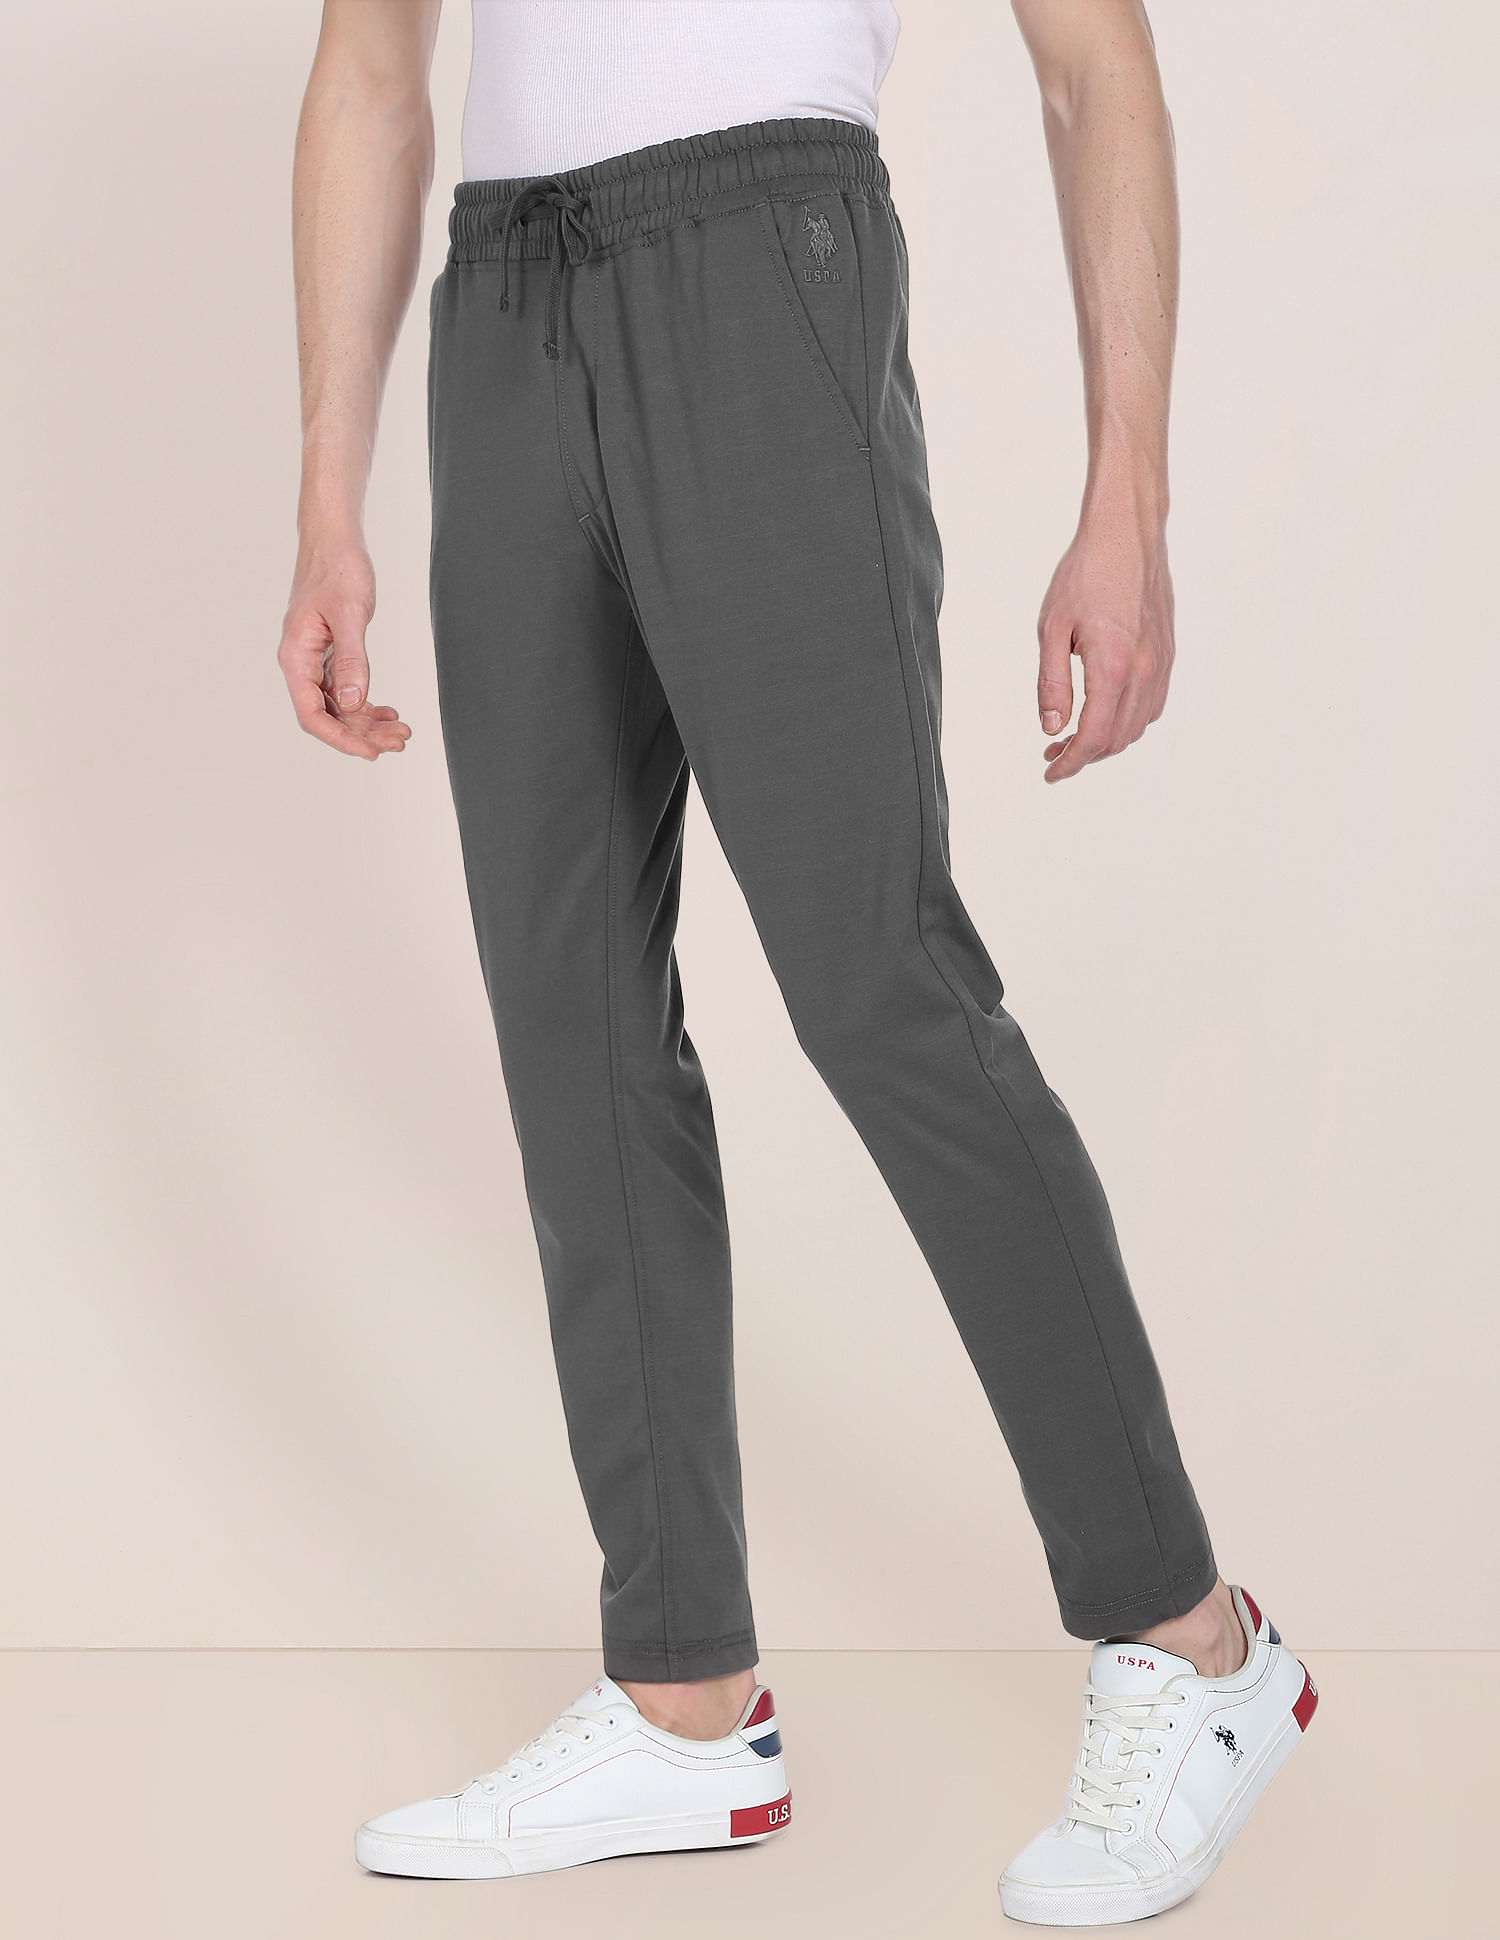 Buy U.S. Polo Assn. Sold Slim Fit Track Pants - NNNOW.com